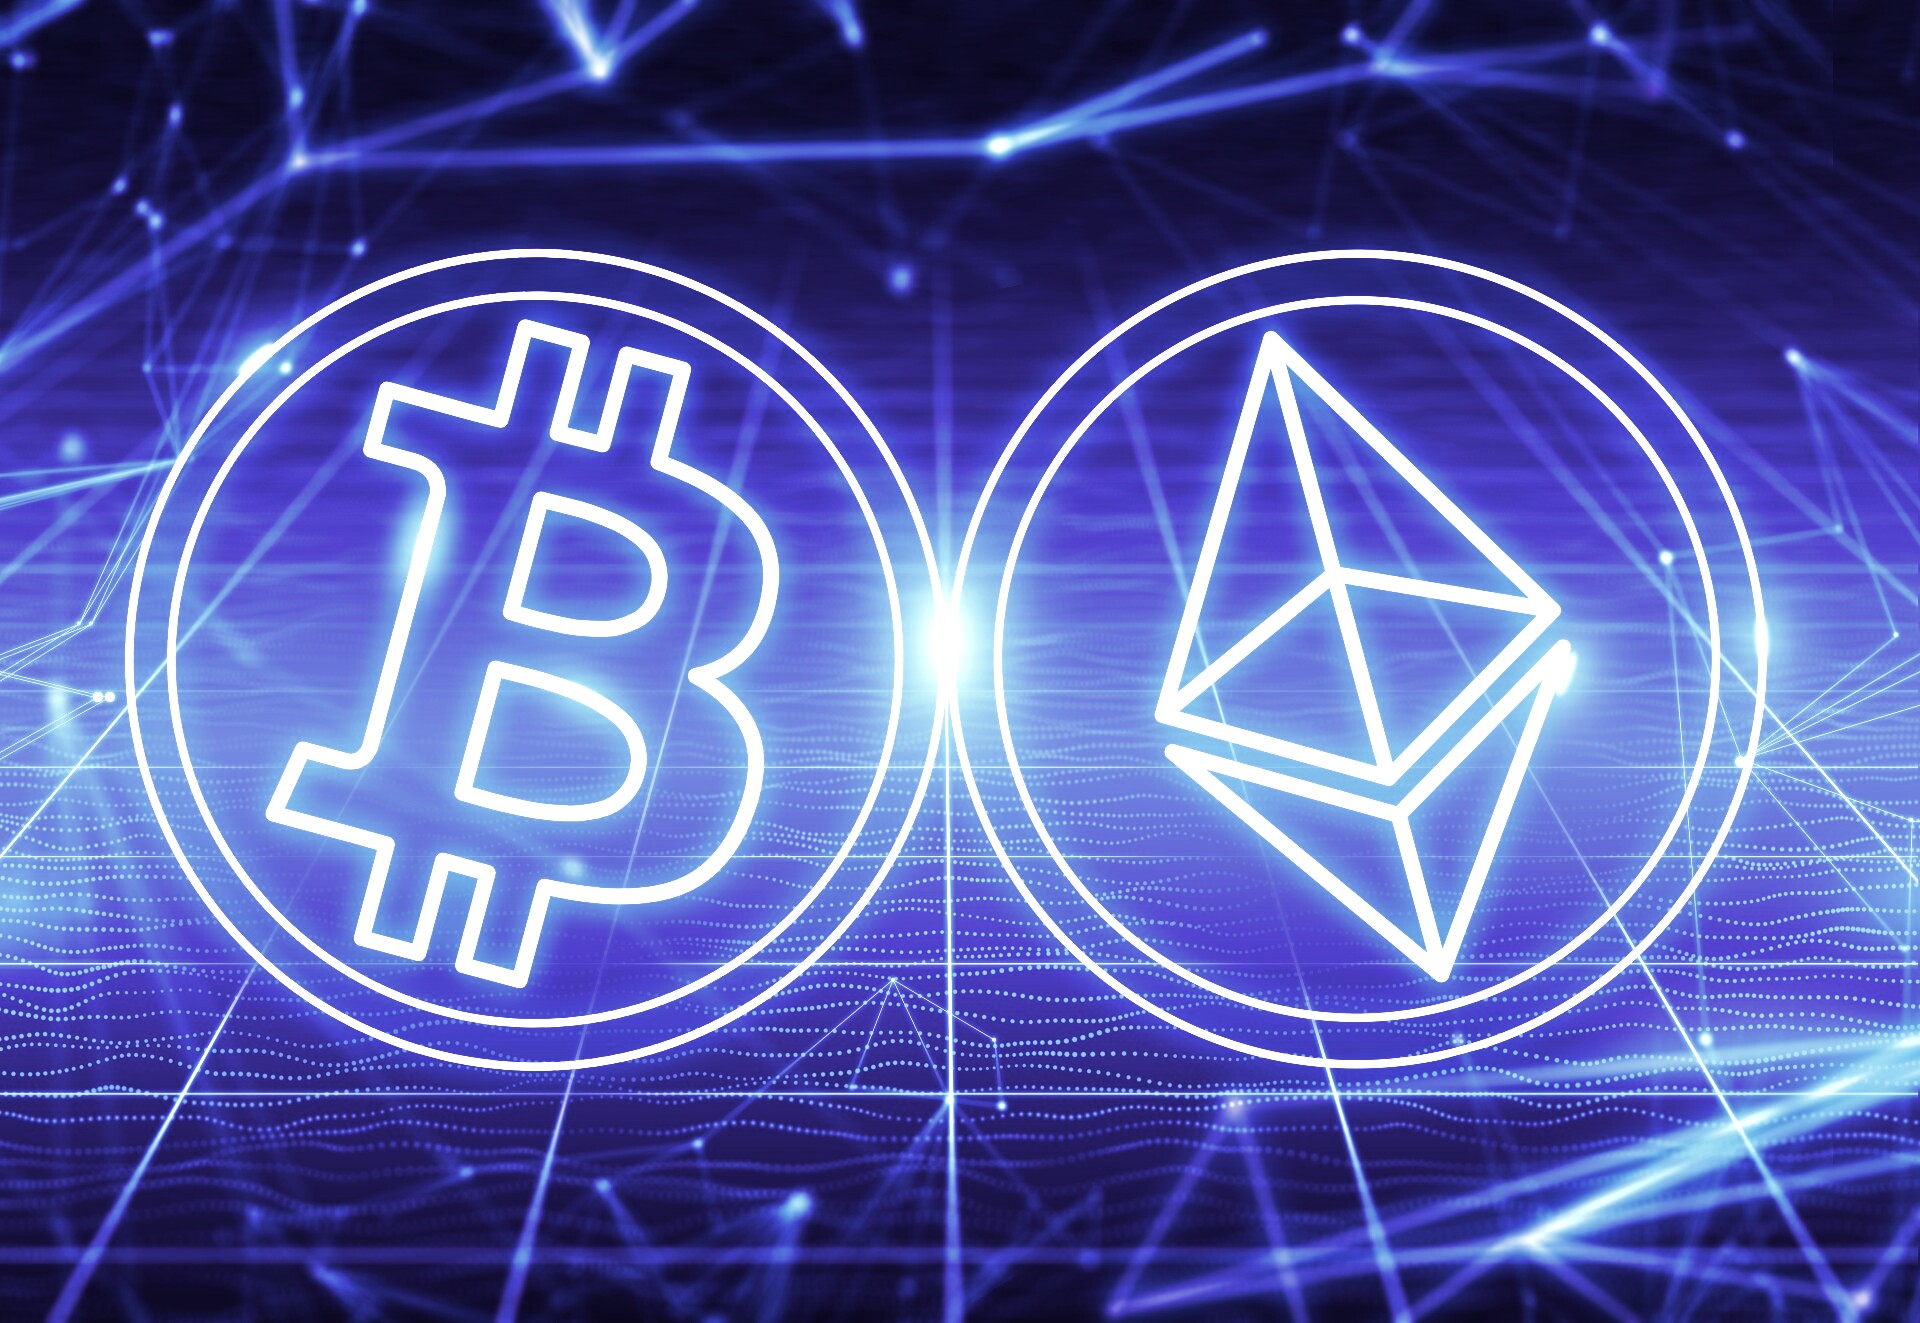 Ethereum Price Surpasses $2,600 While Bitcoin Growth Slows Down